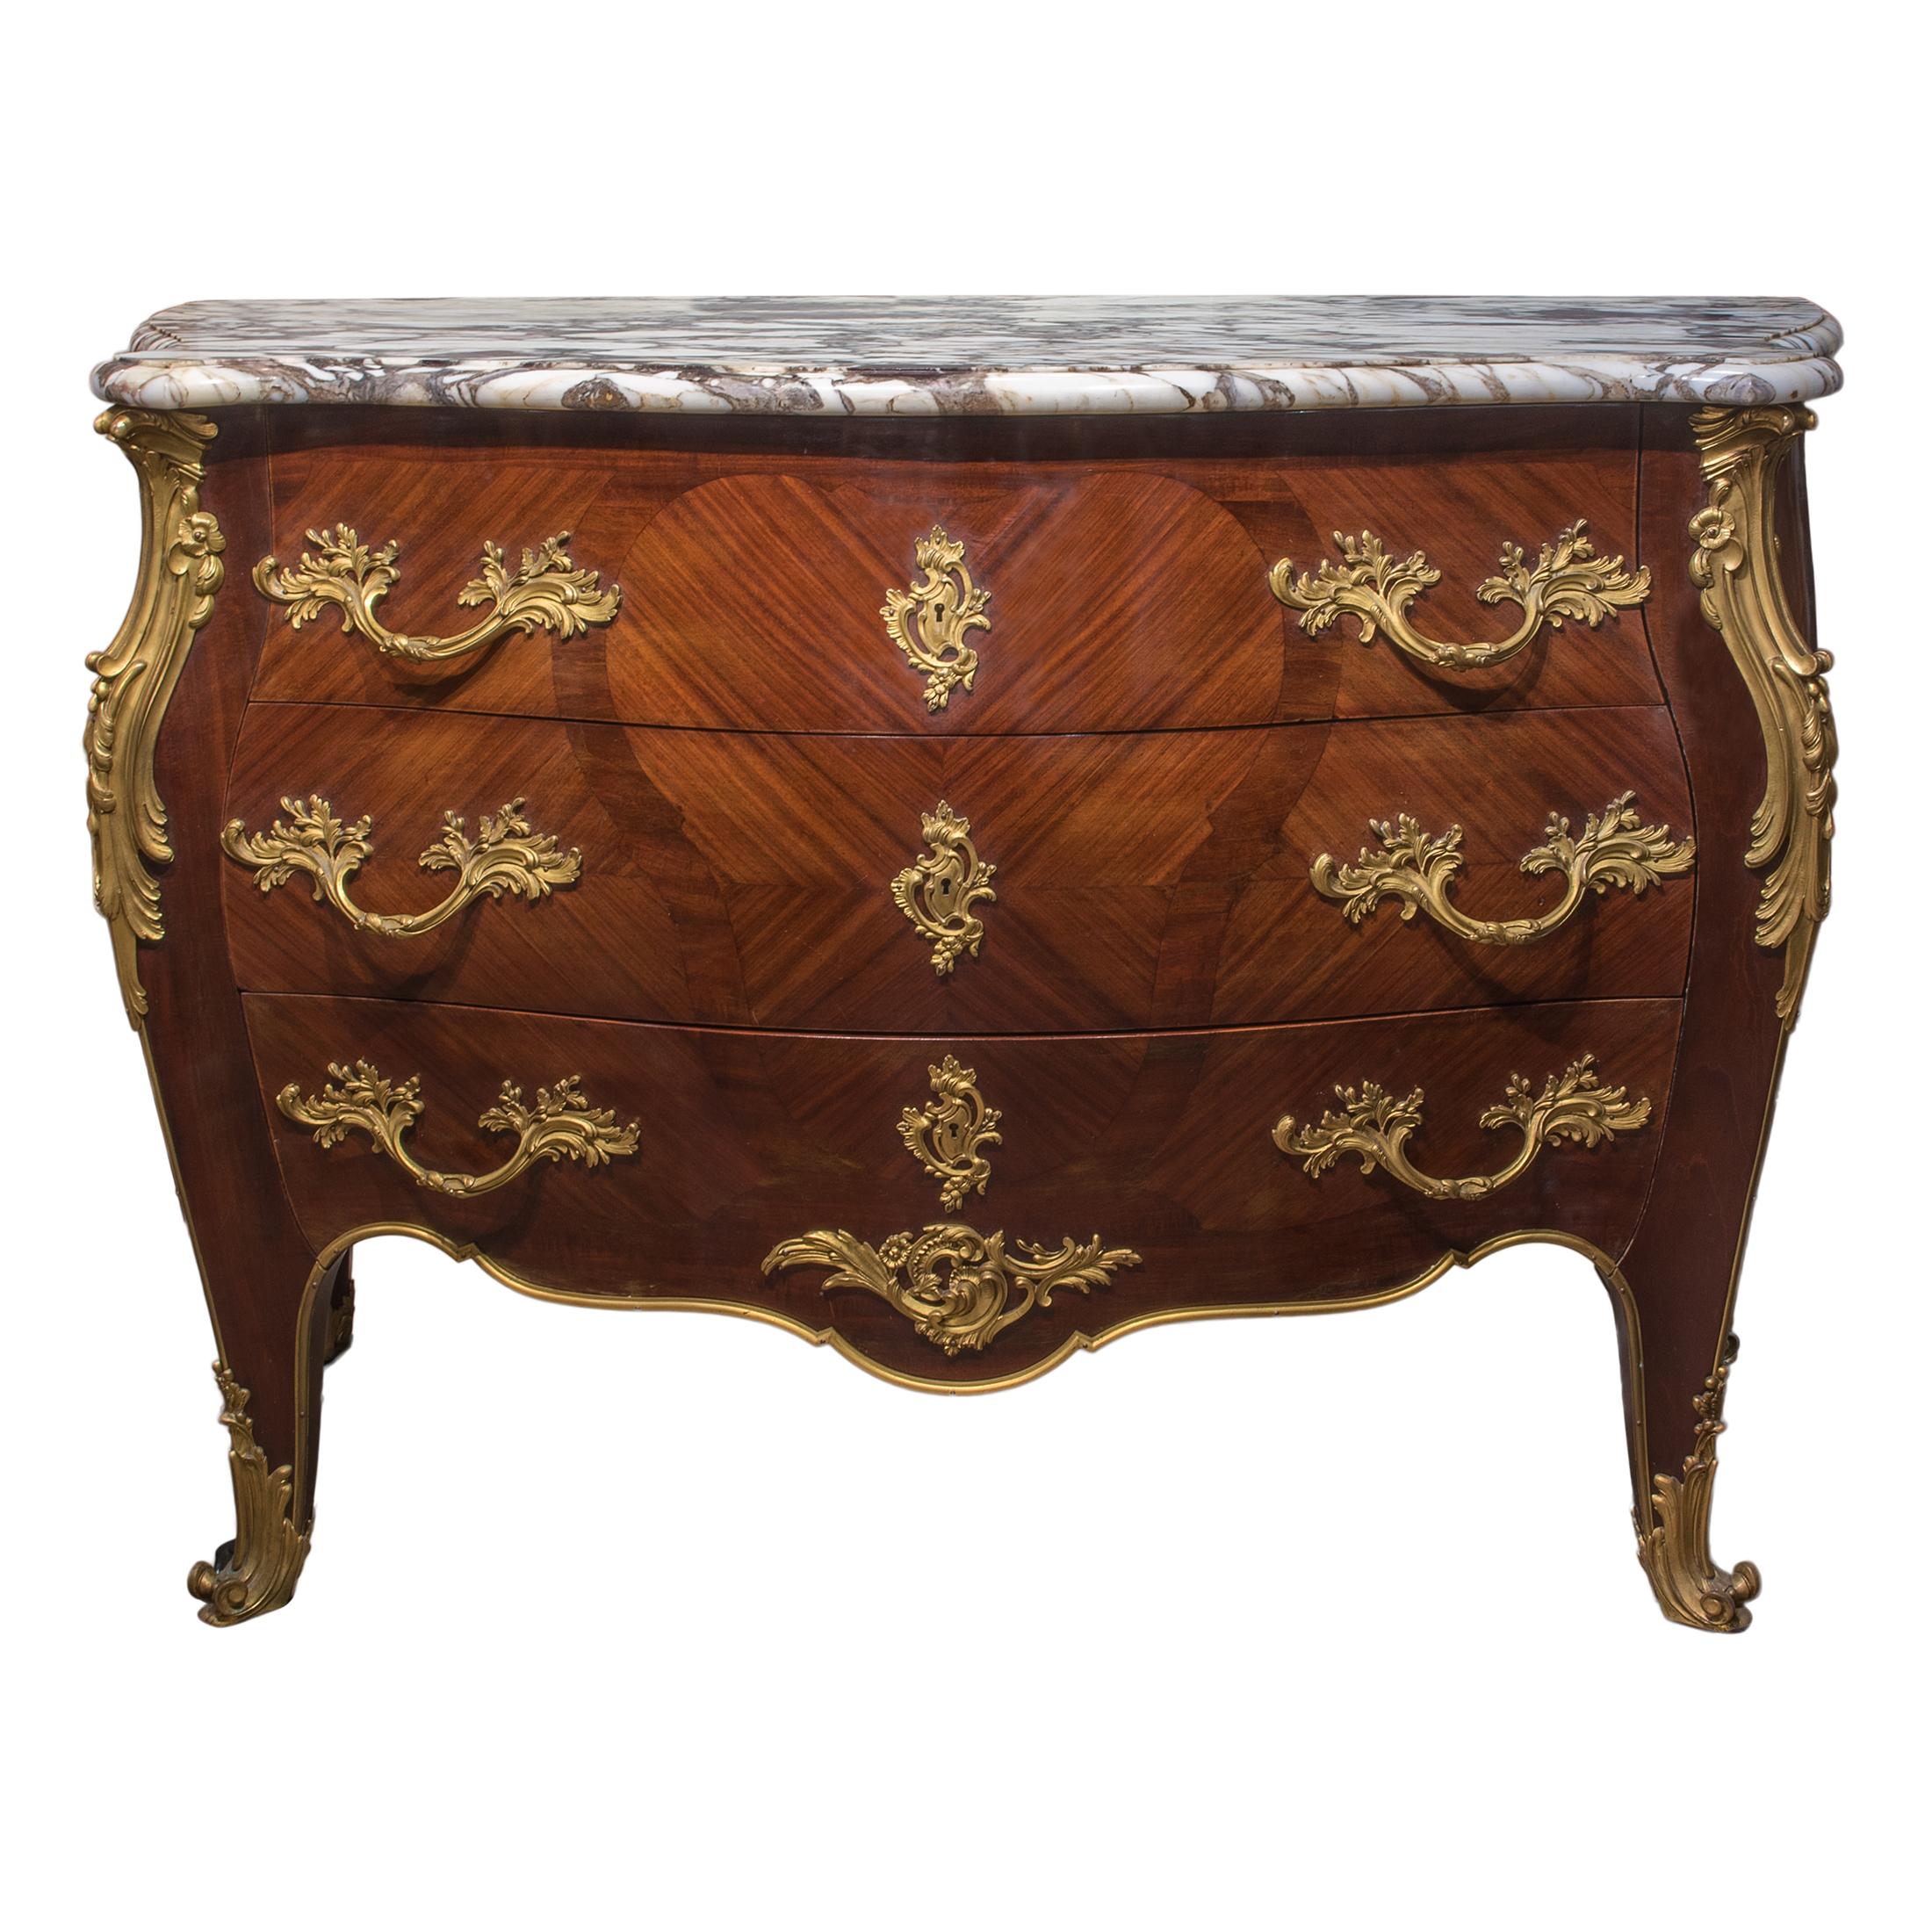 Louis XV-style gilt bronze mounted highly important commode surmounted by a breche violate marble top fitted with three long drawers. The back with a stenciled stamp ‘IDRAC/AMEUBLEMENTS DE LUXE/28, BOULEVARD HAUSSMANN - PARIS.’

Origin: